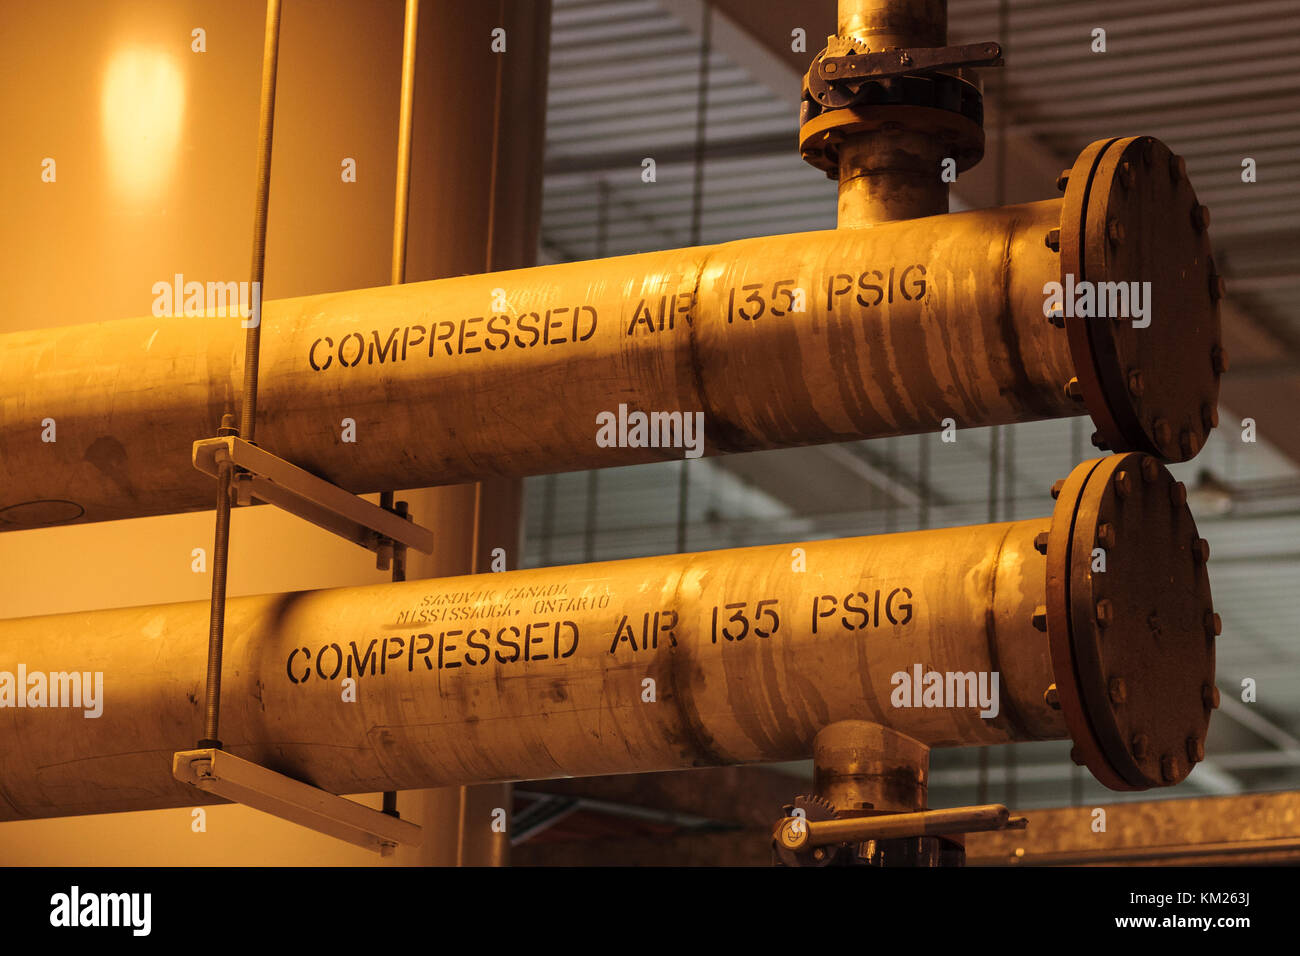 Compressed air pipes in an industrial setting Stock Photo